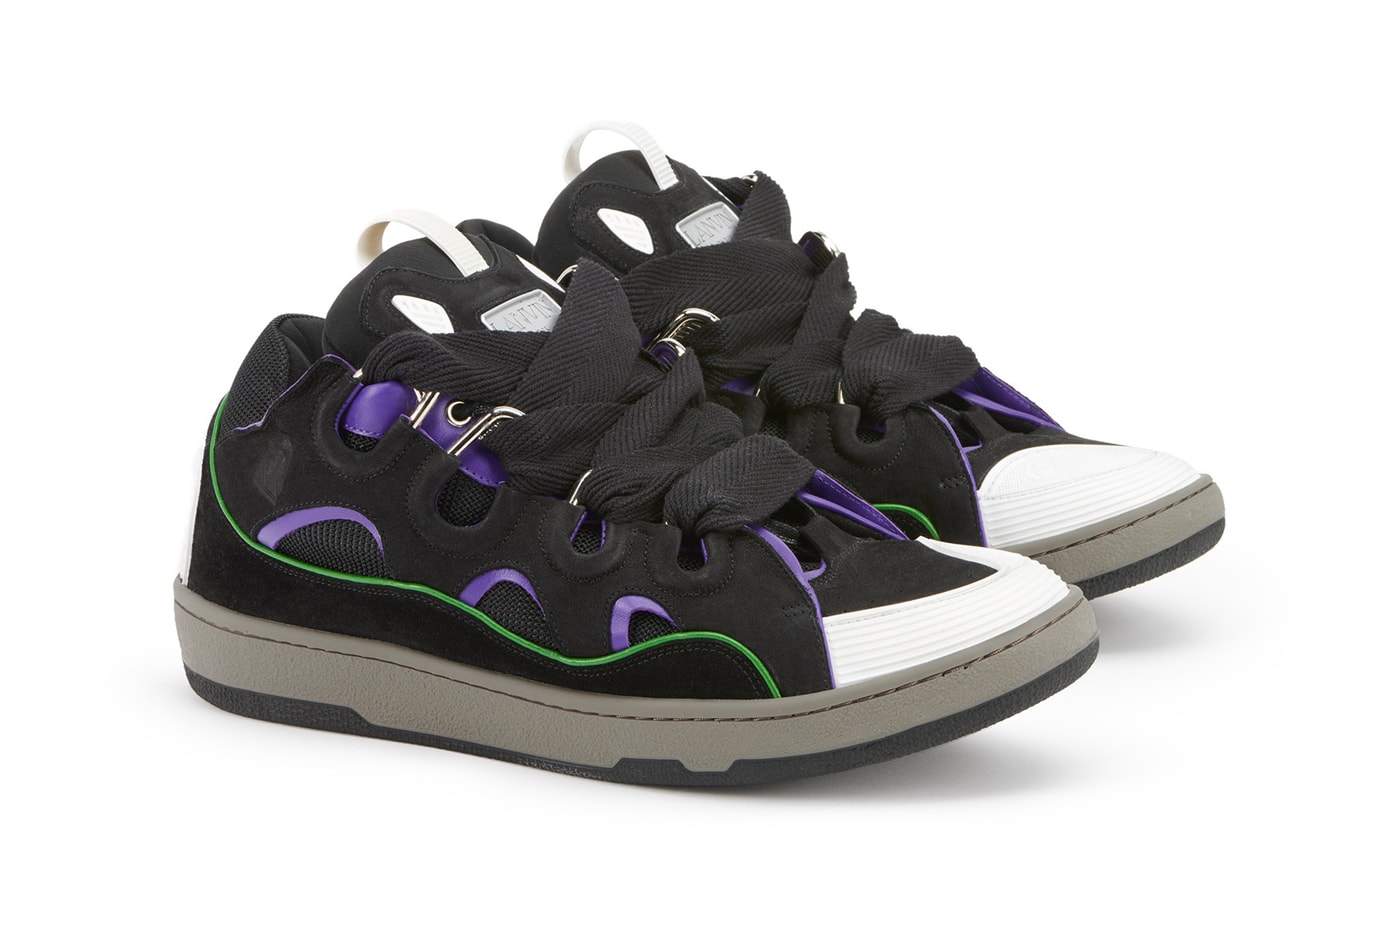 Lanvin Releases New Colors to Its $900 USD Osiris D3-Inspired CURB Sneakers fm skrk11 dra1 p21b145 Bruno Sialelli 